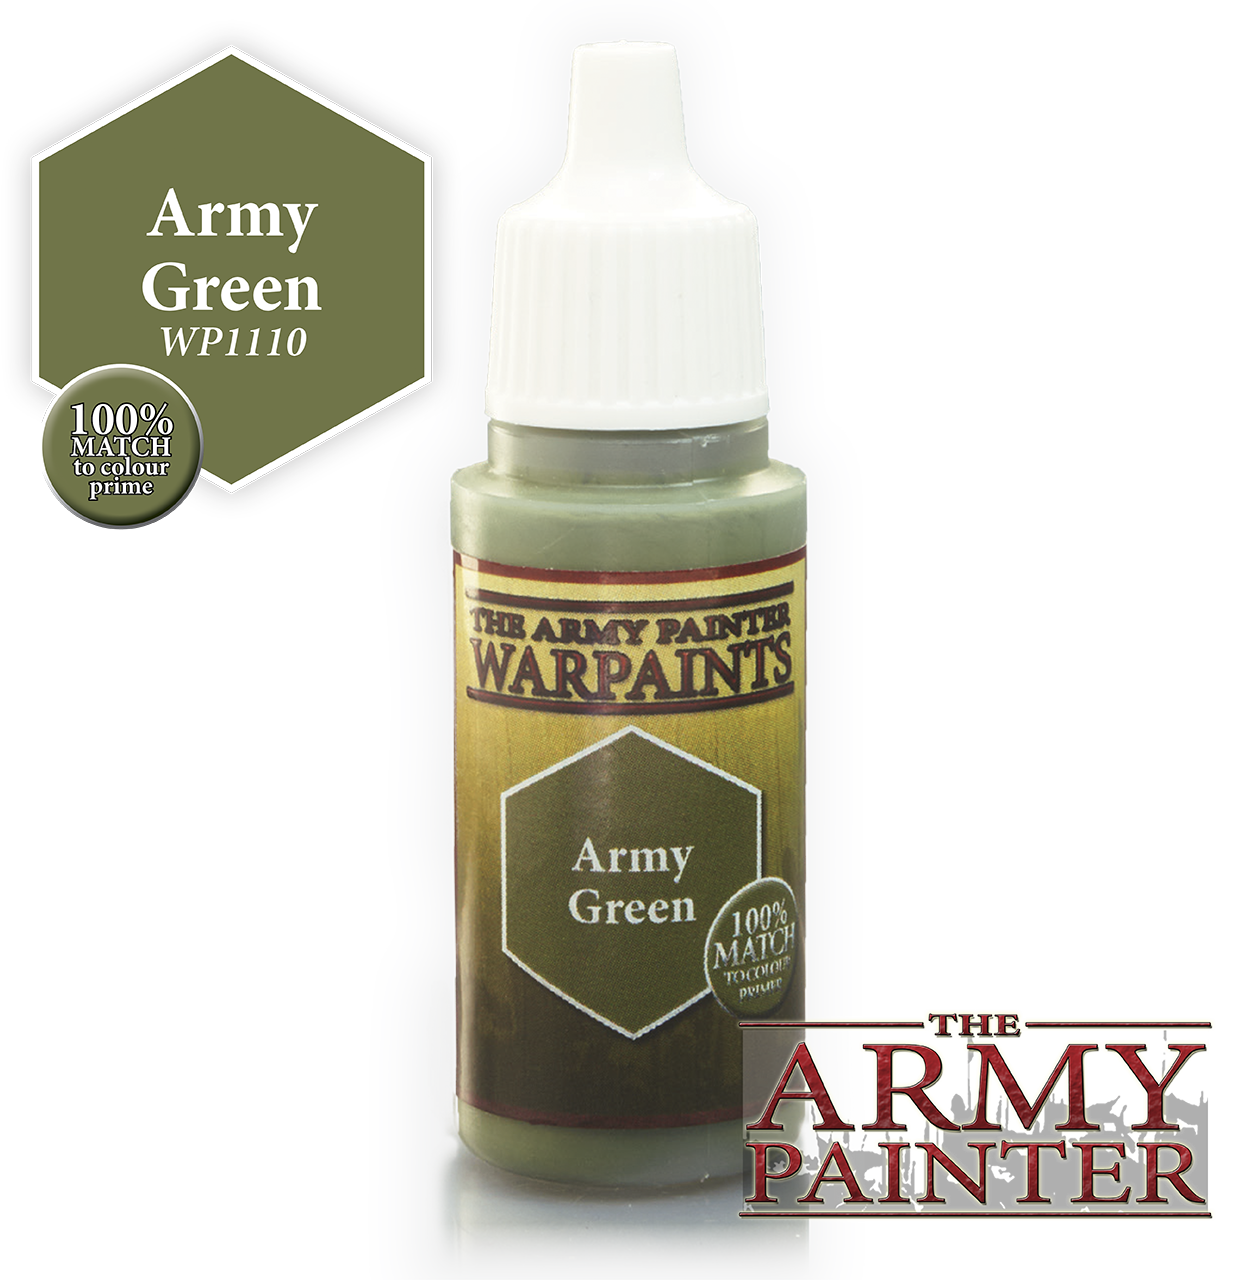 The ARMY PAINTER: Acrylics Warpaint - Army Green | Tacoma Games